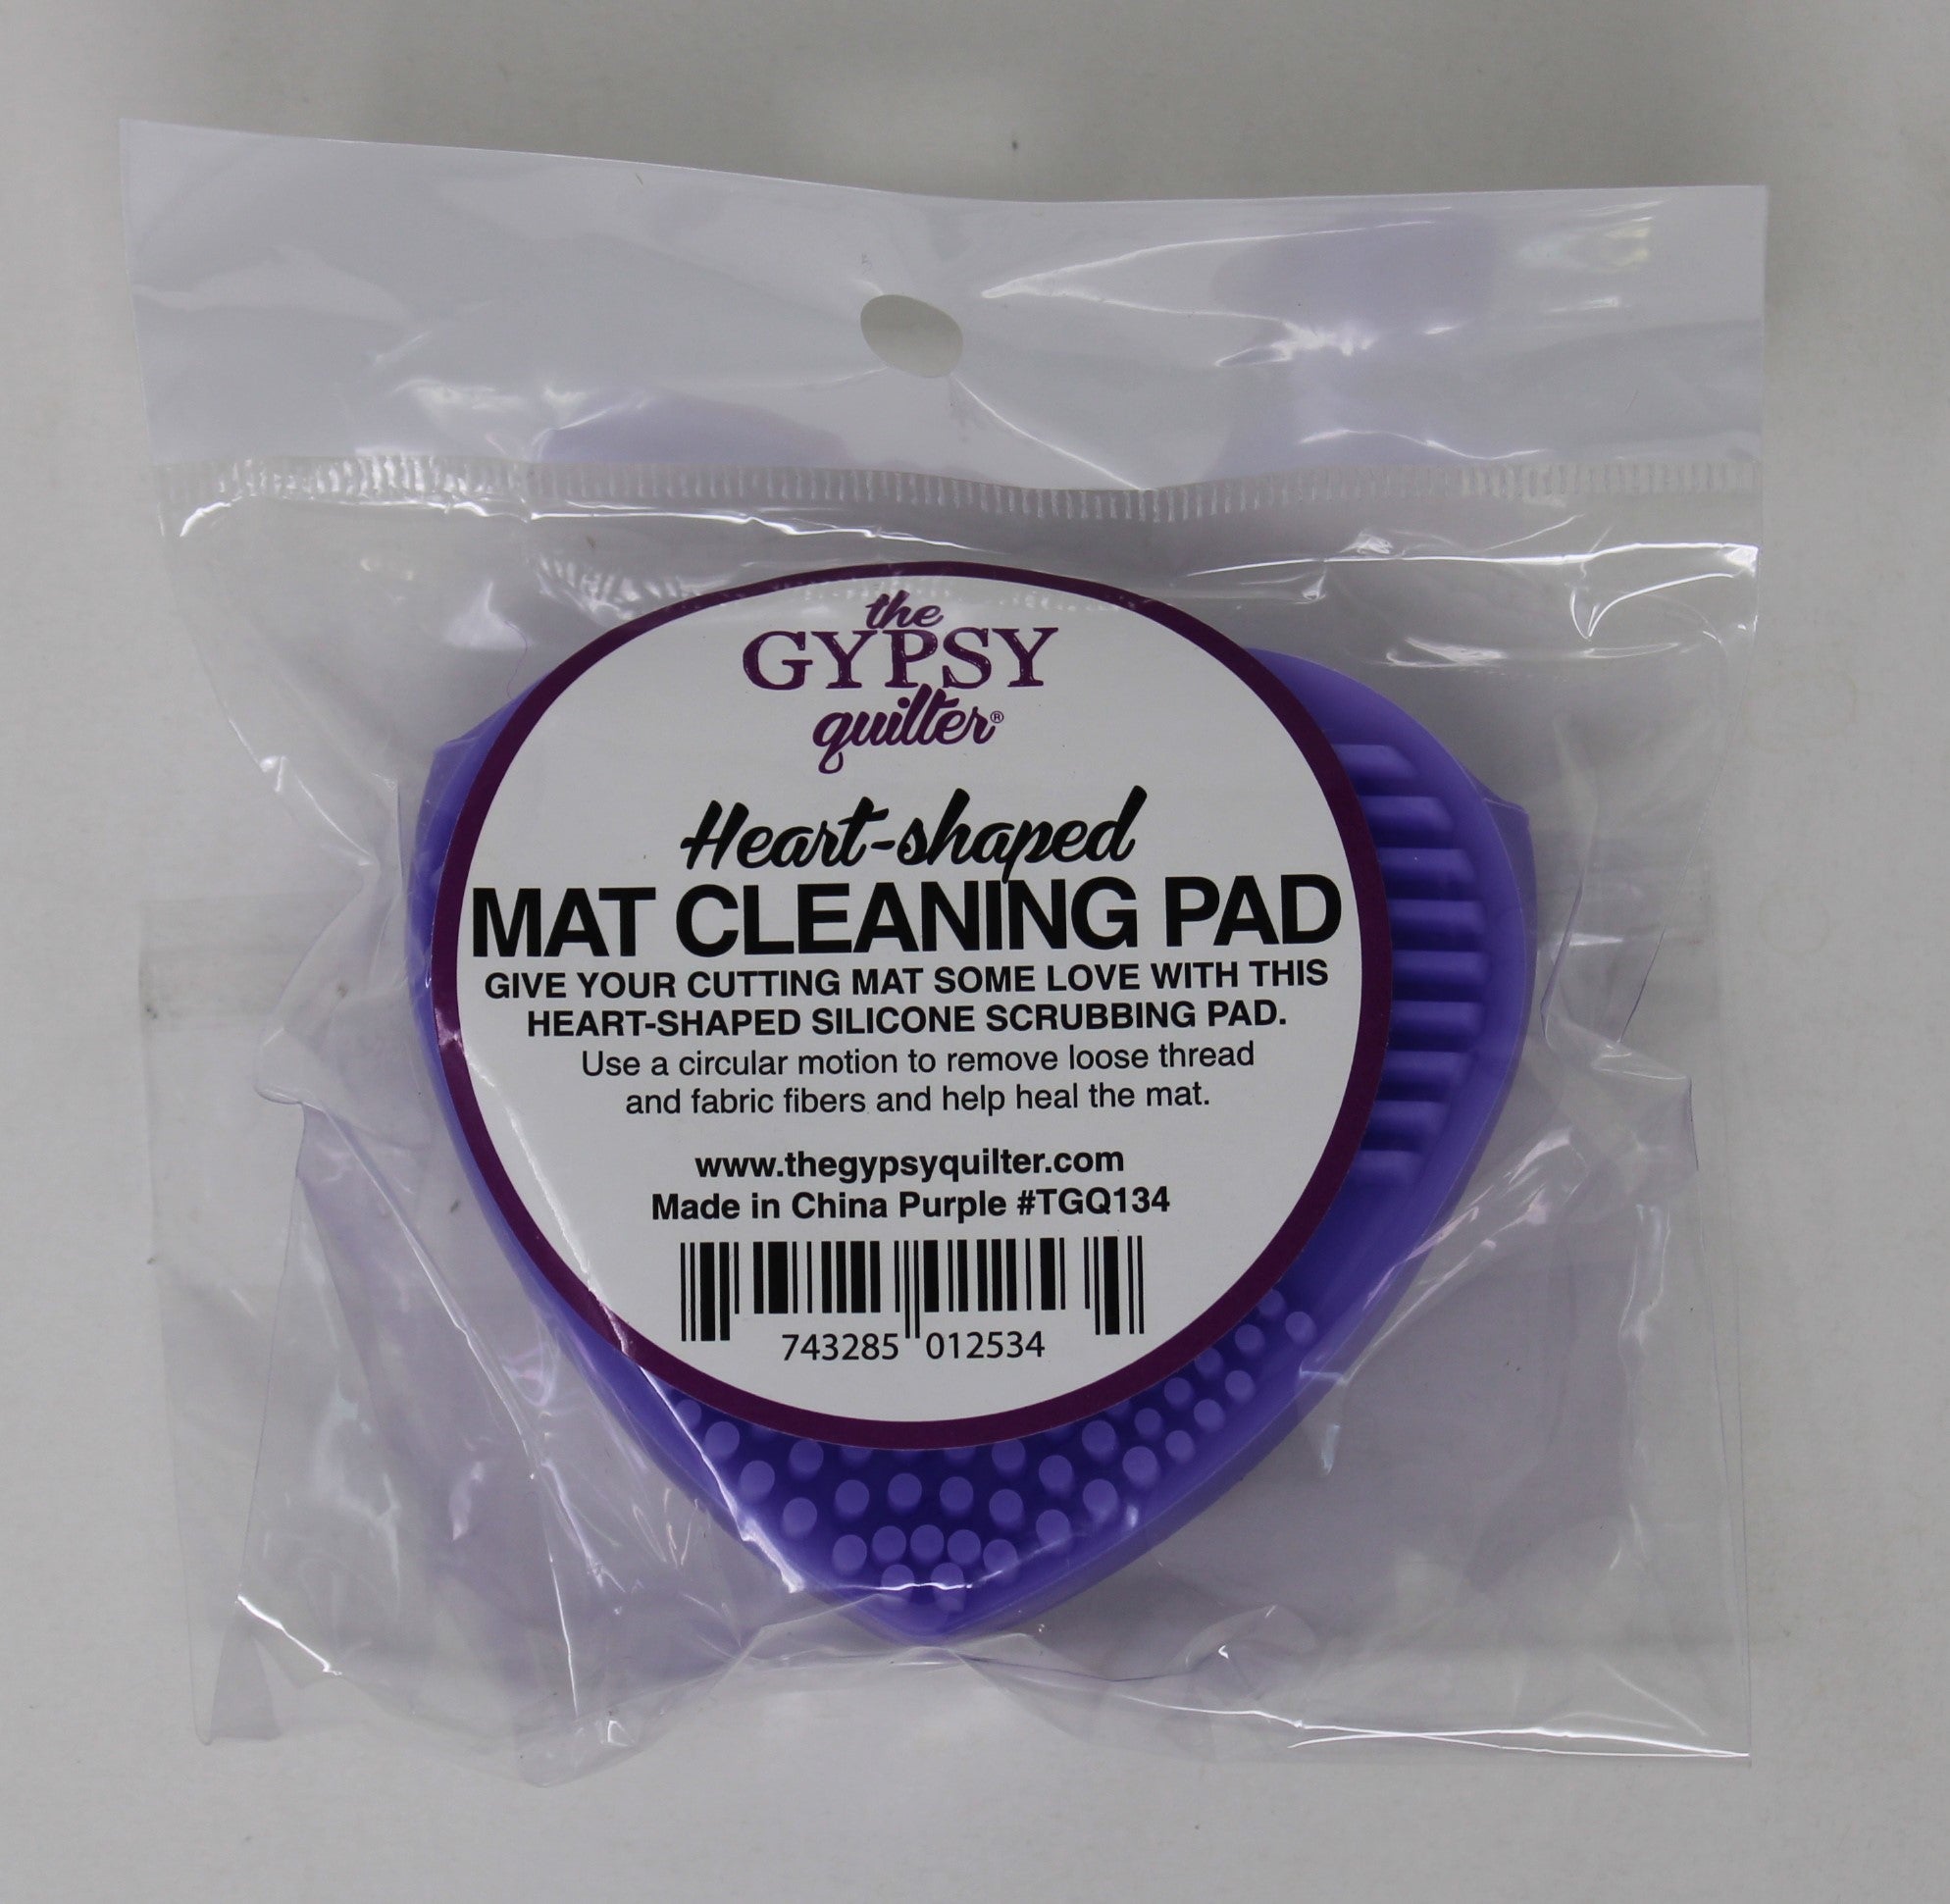 The Gypsy Quilter - Heart-Shaped Mat Cleaning Pad